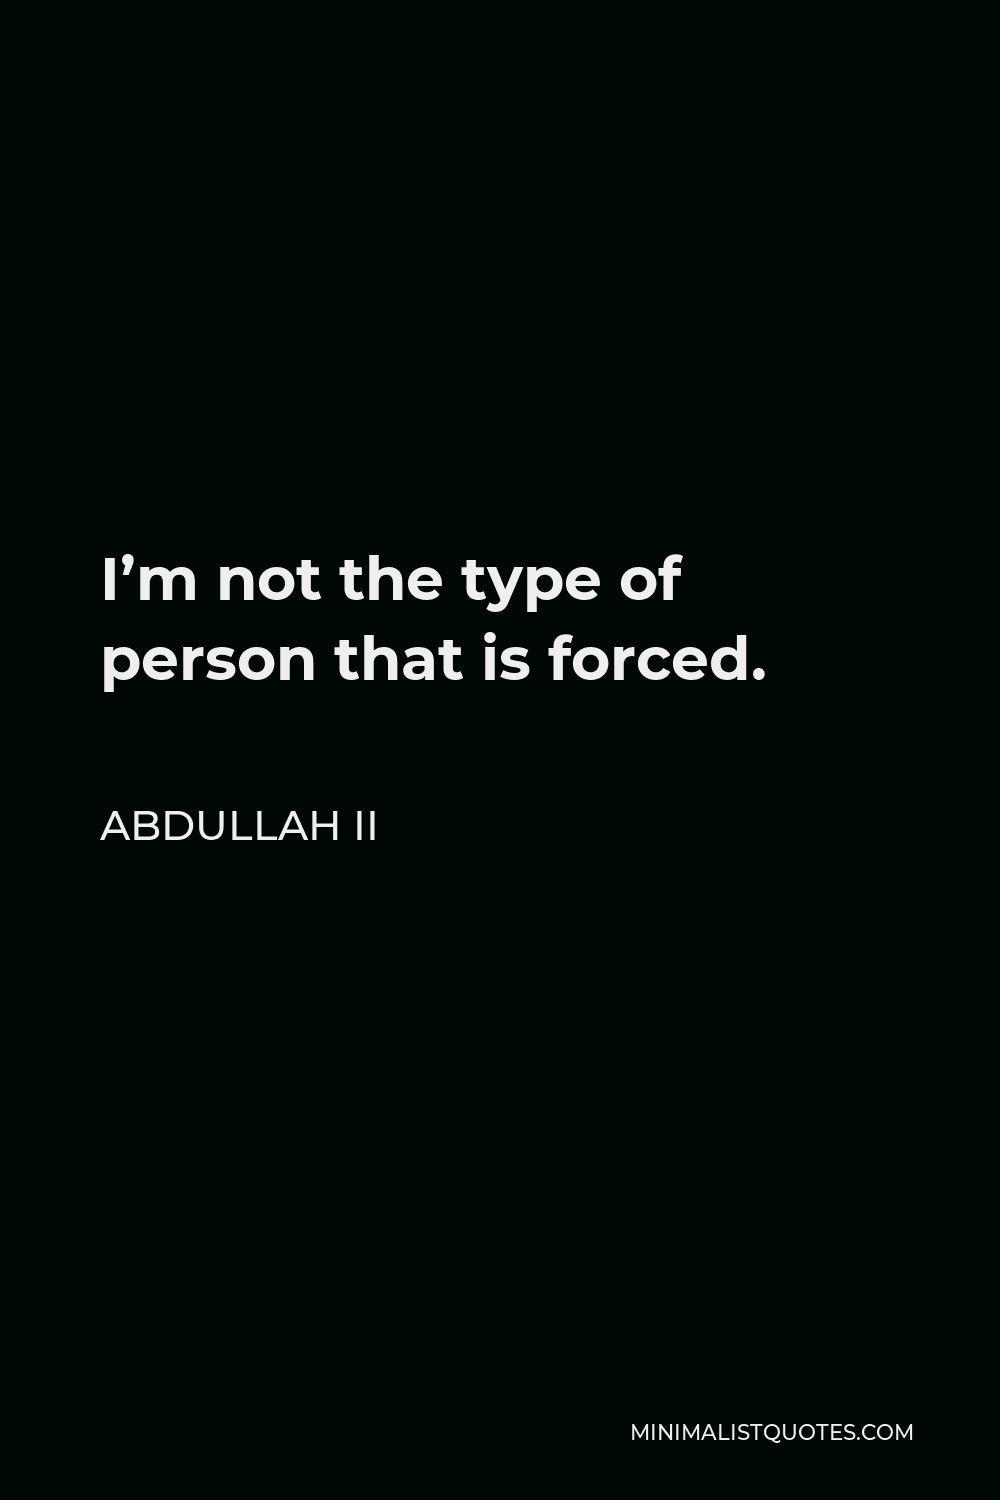 Abdullah II Quote - I’m not the type of person that is forced.